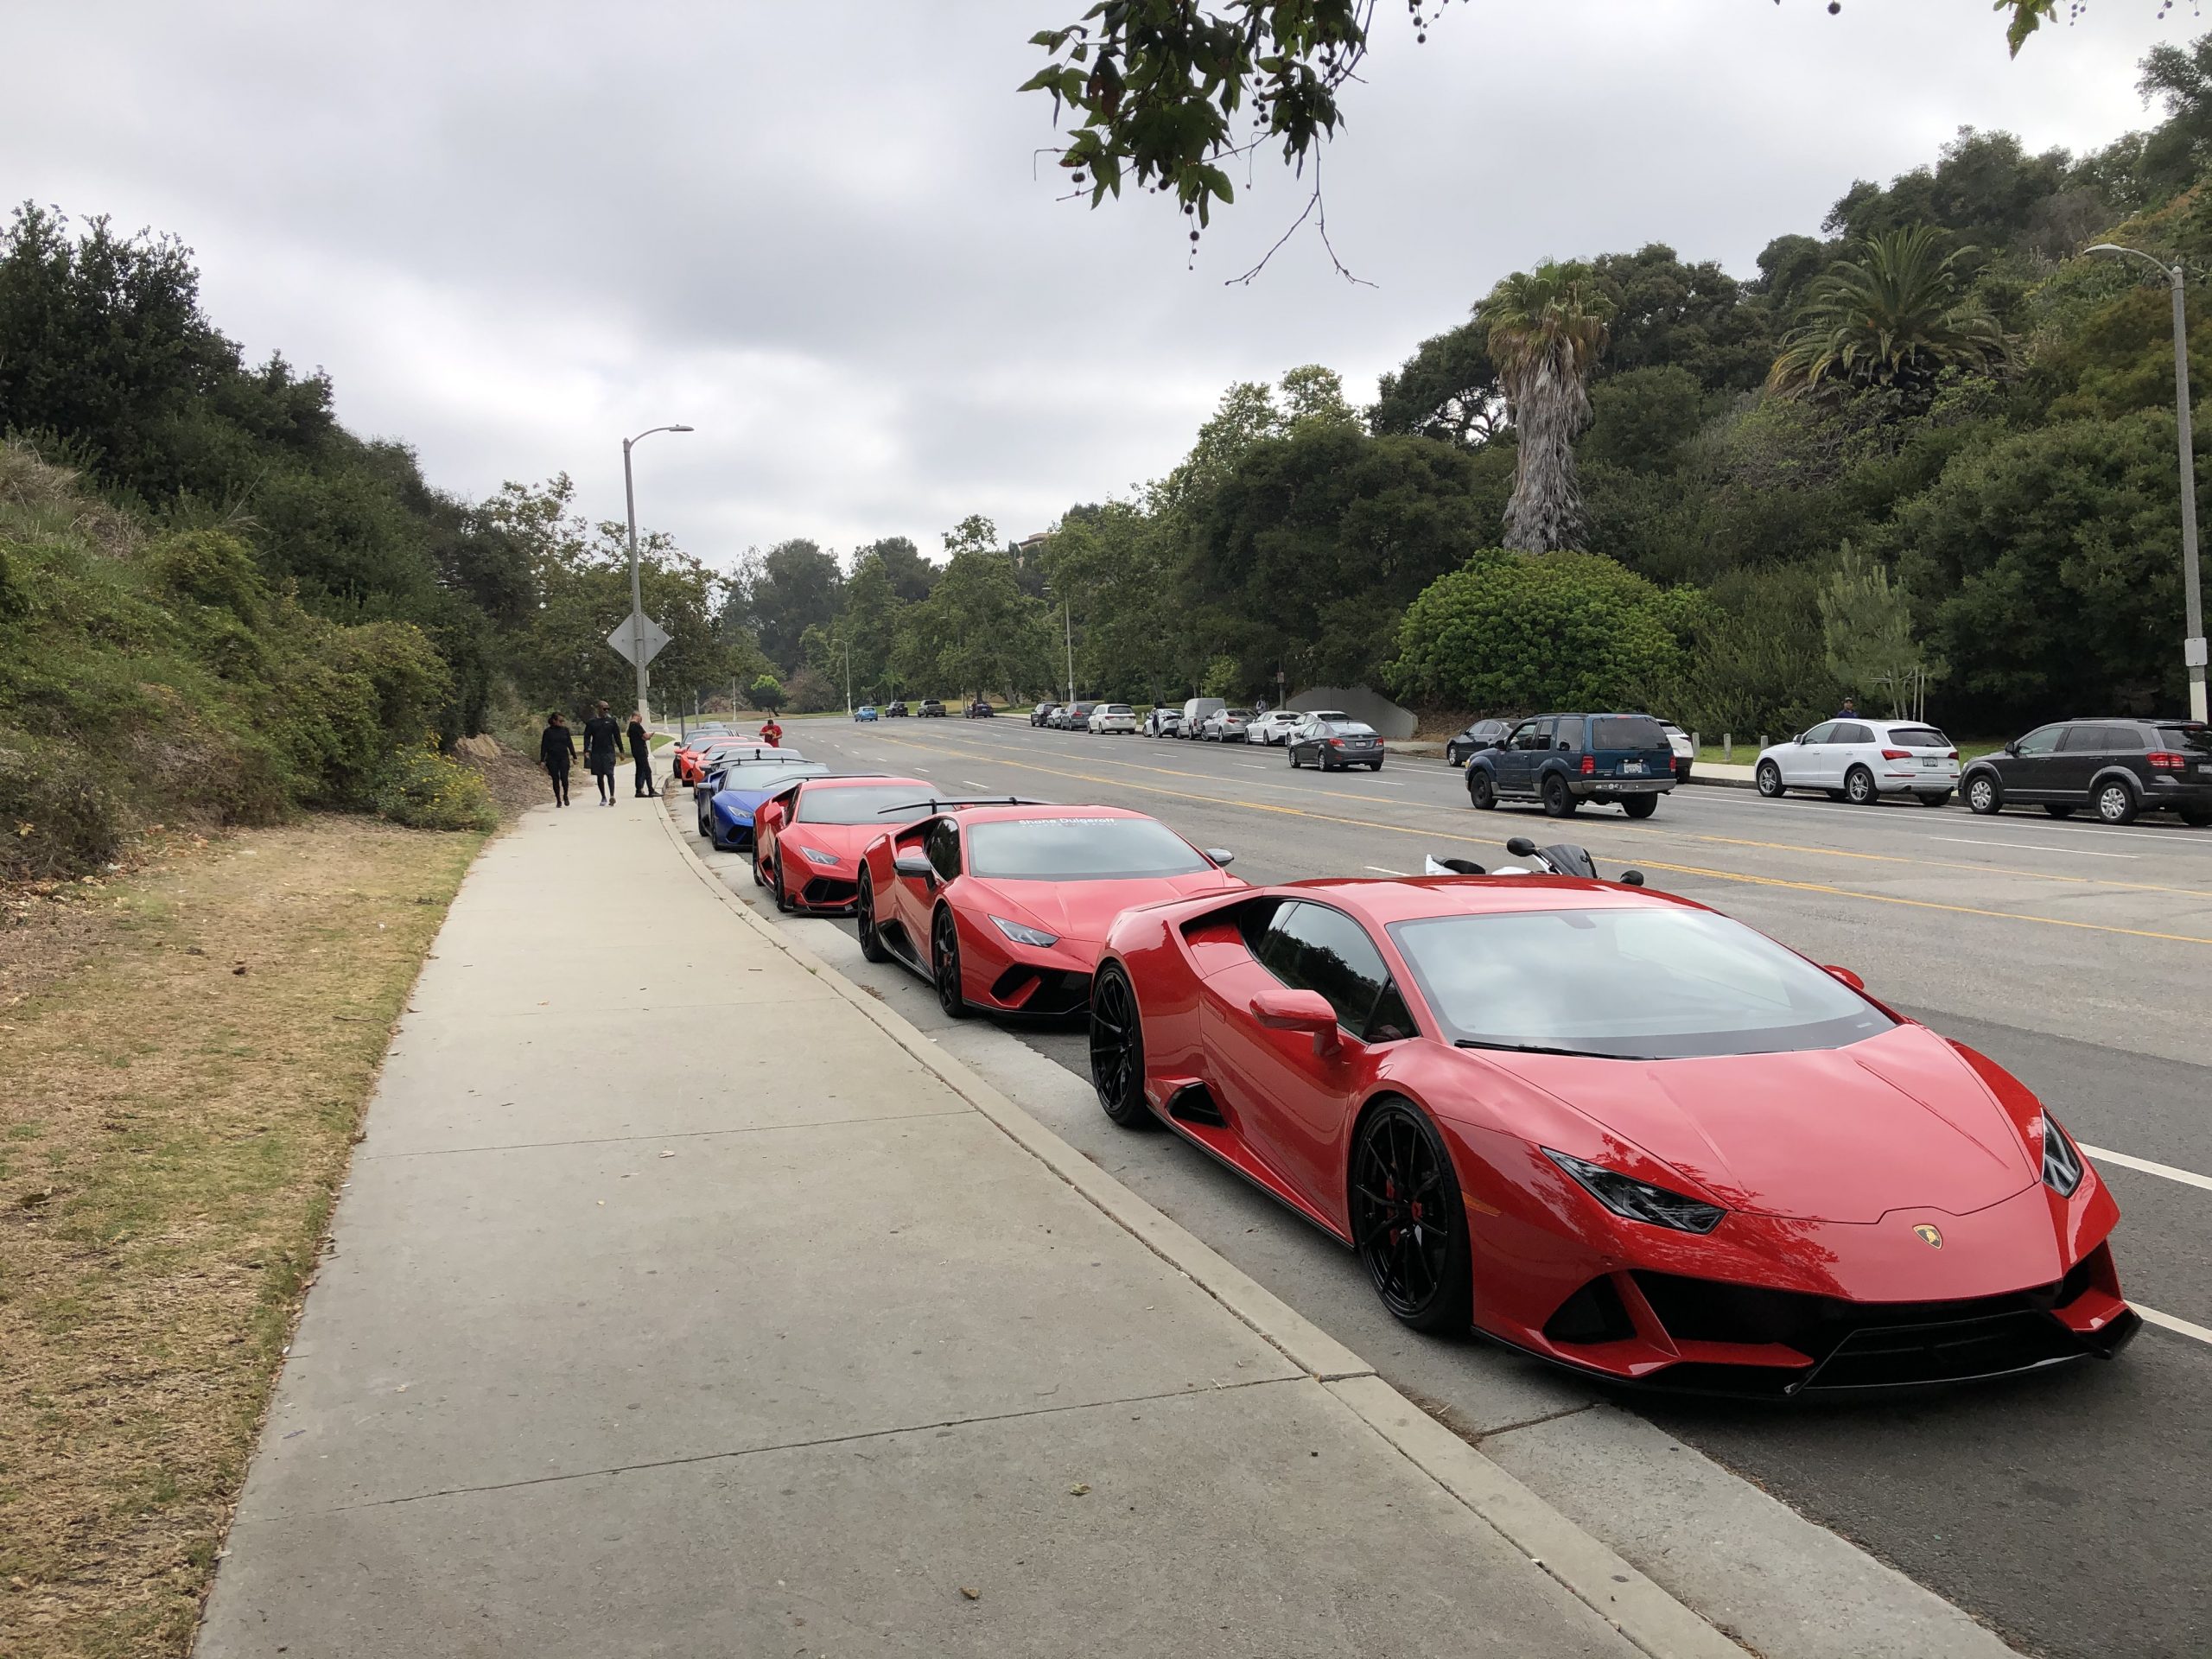 How Much Does It Cost To Lease A Lamborghini? - Lamborghini For Sale